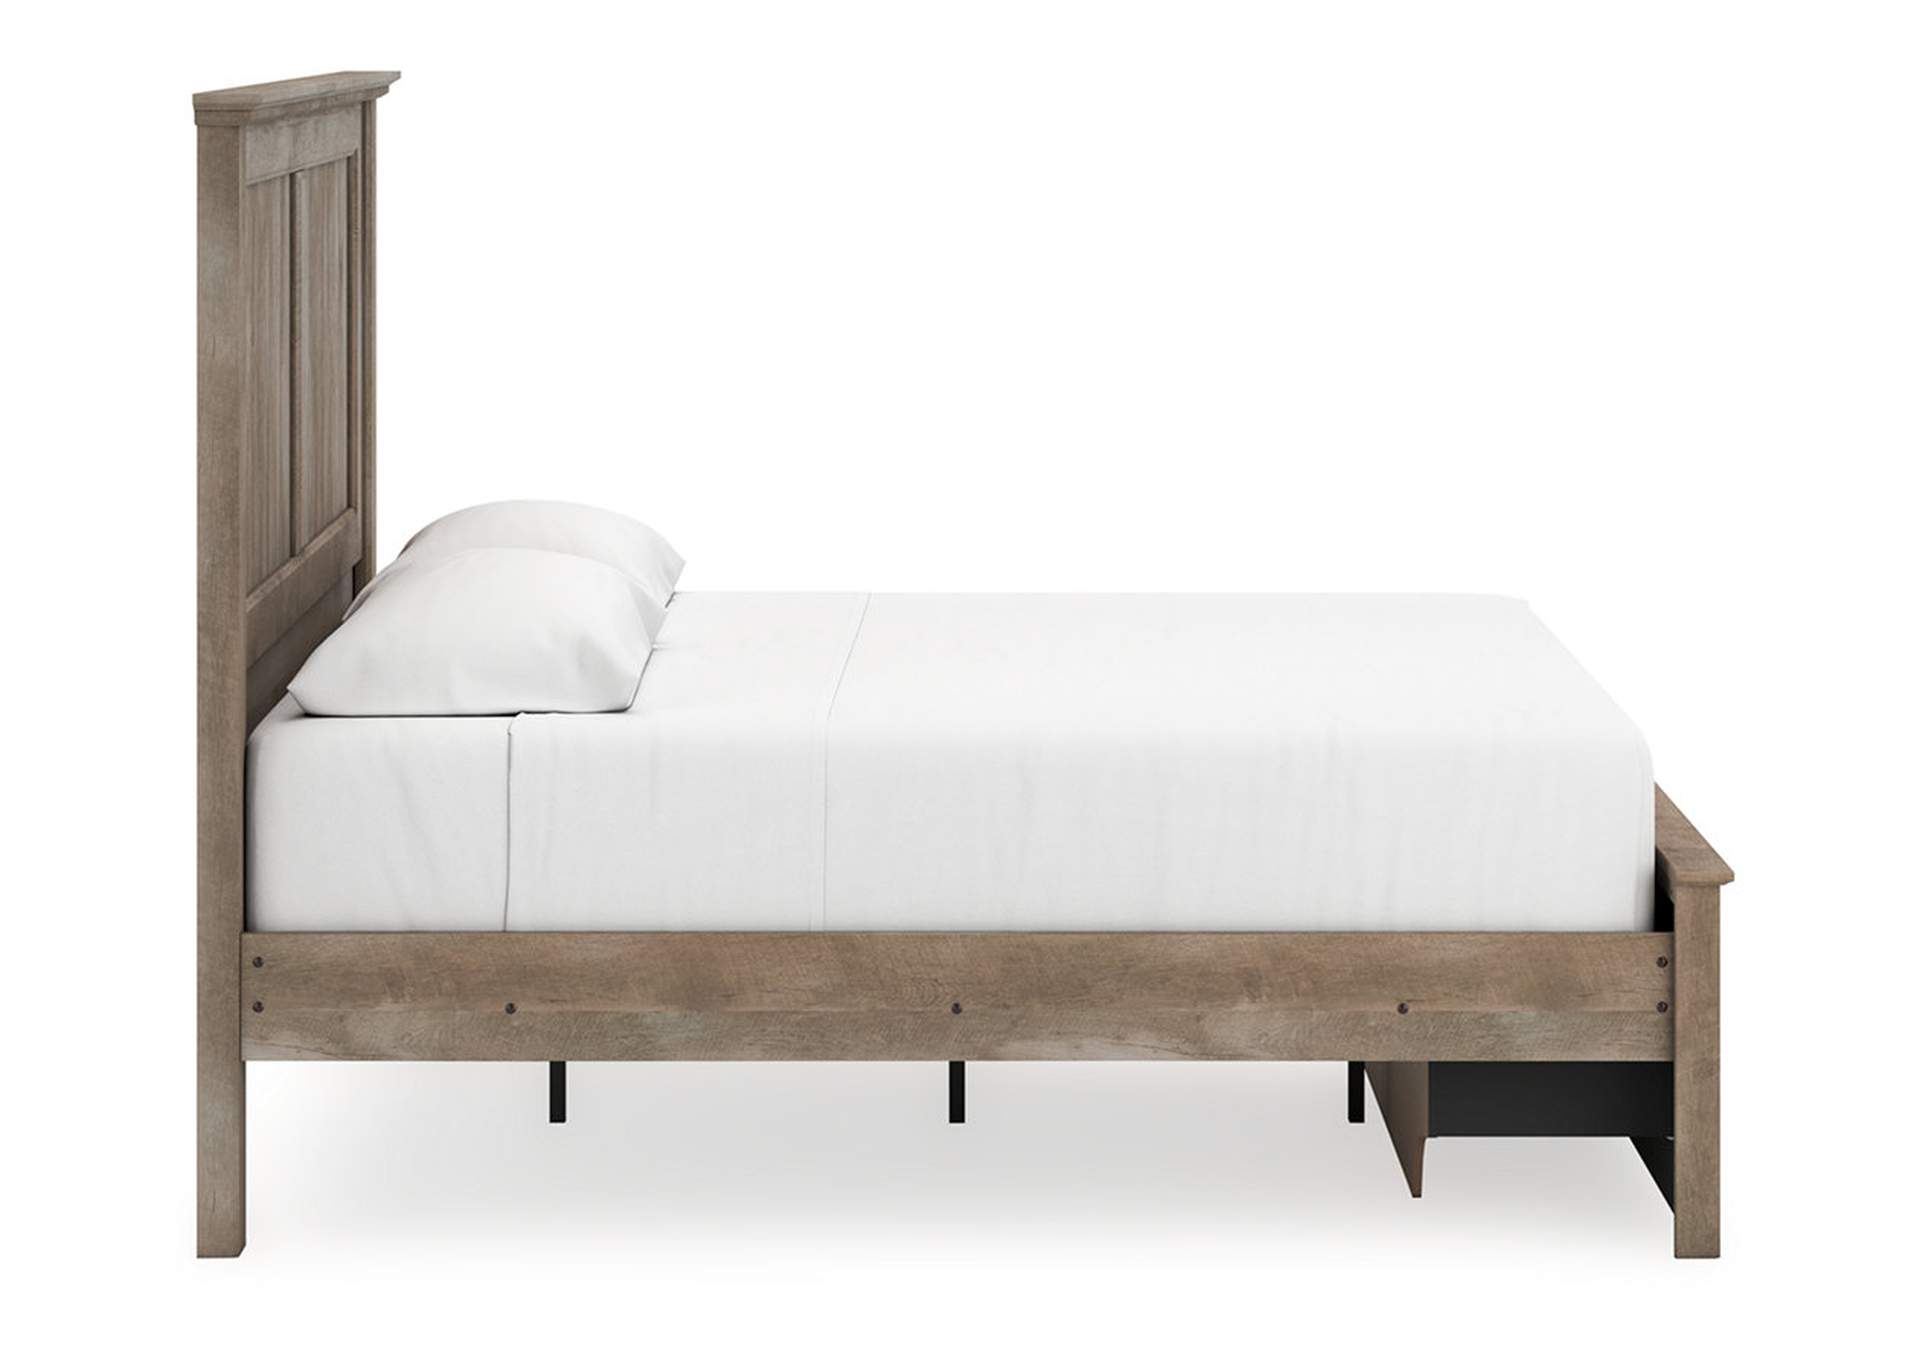 Yarbeck King Panel Bed with Storage,Signature Design By Ashley